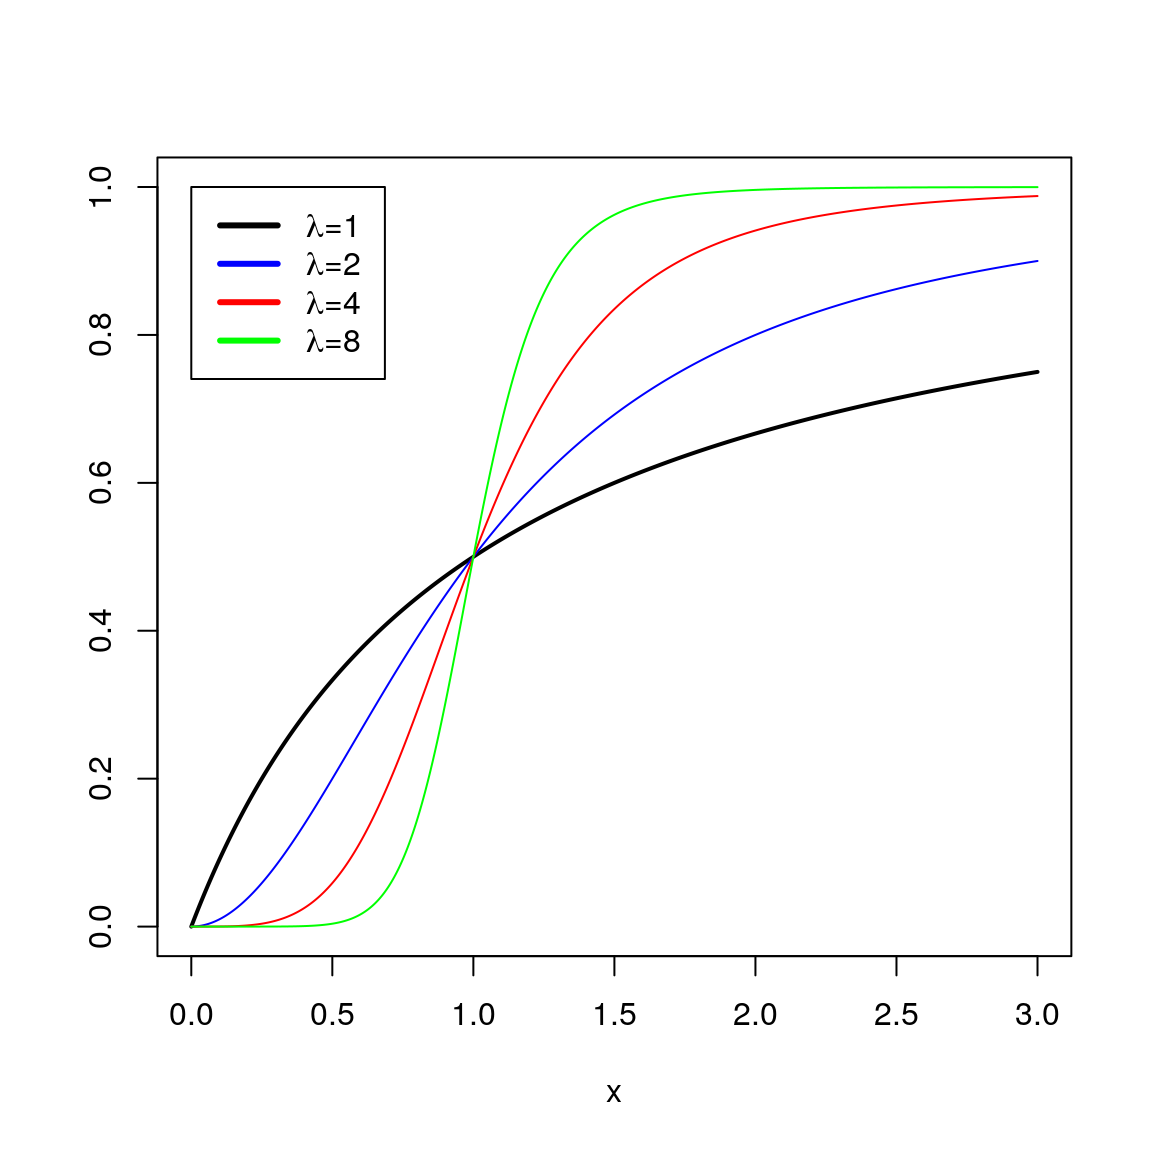 Hill's equation for different values of the slope parameter λ